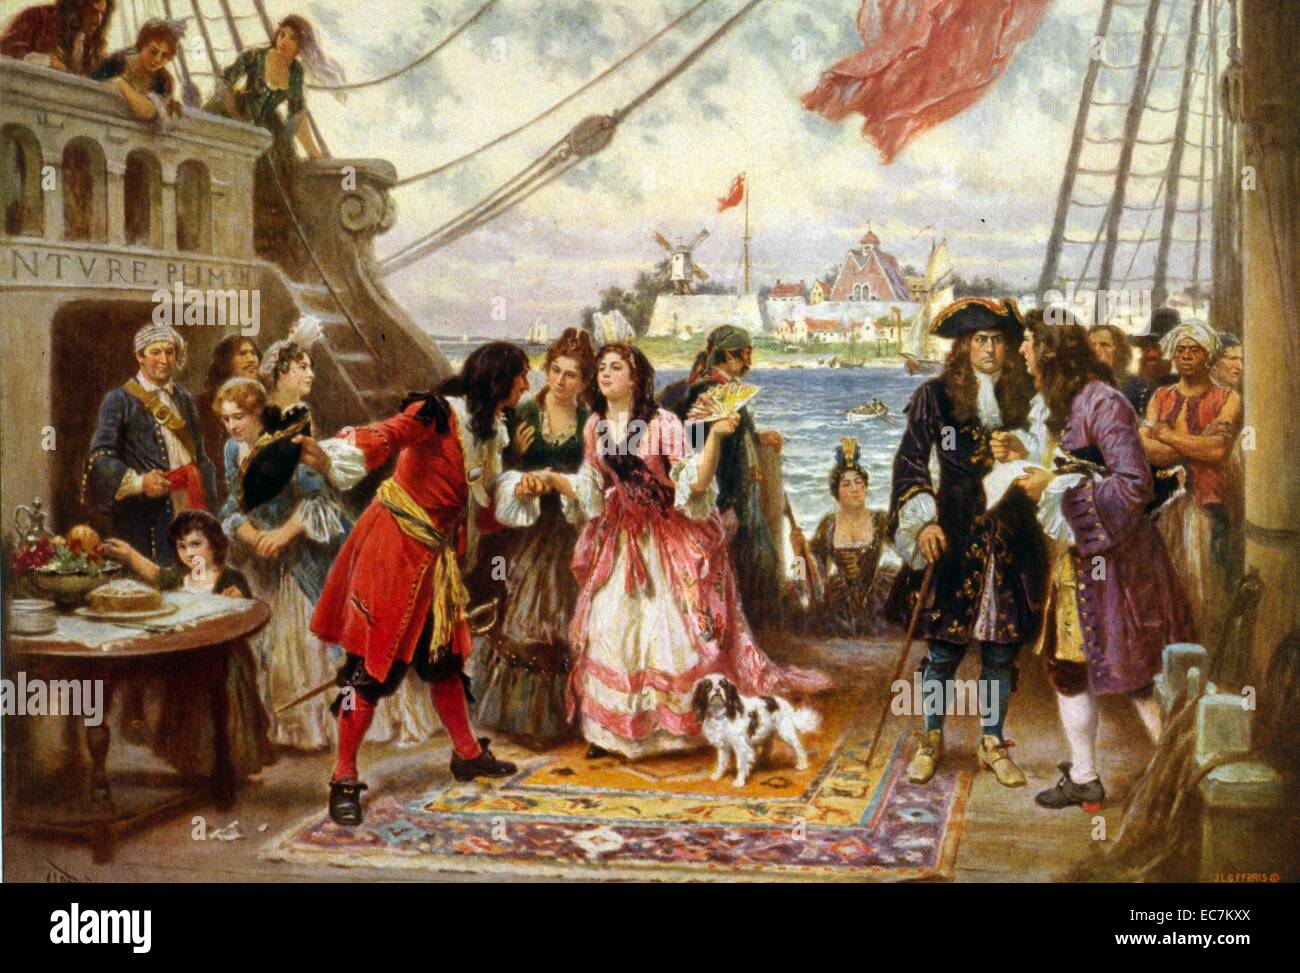 Captain Kidd in New York Harbour by Jean Leon Gerome Ferris. Captain William Kidd welcoming a young woman on board his ship; other men and women crowd the deck as another woman steps aboard. Stock Photo